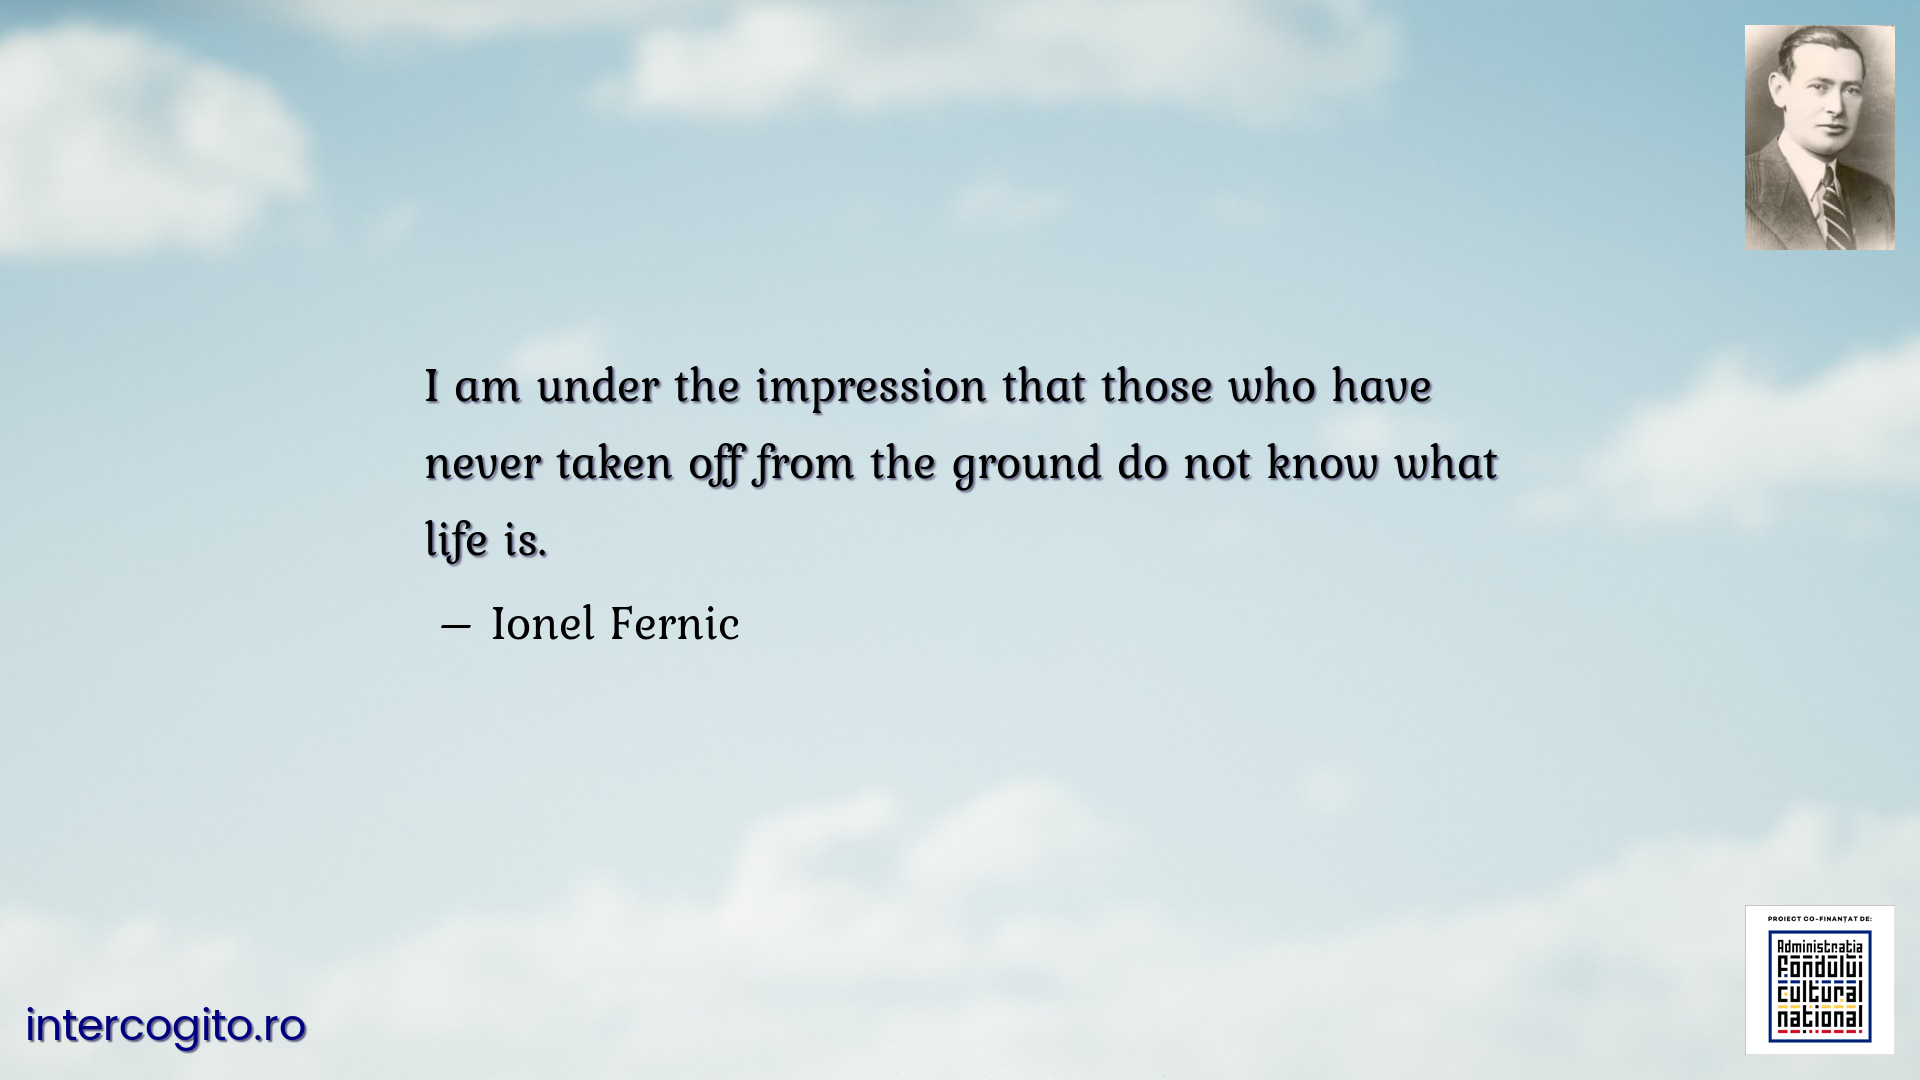 I am under the impression that those who have never taken off from the ground do not know what life is.